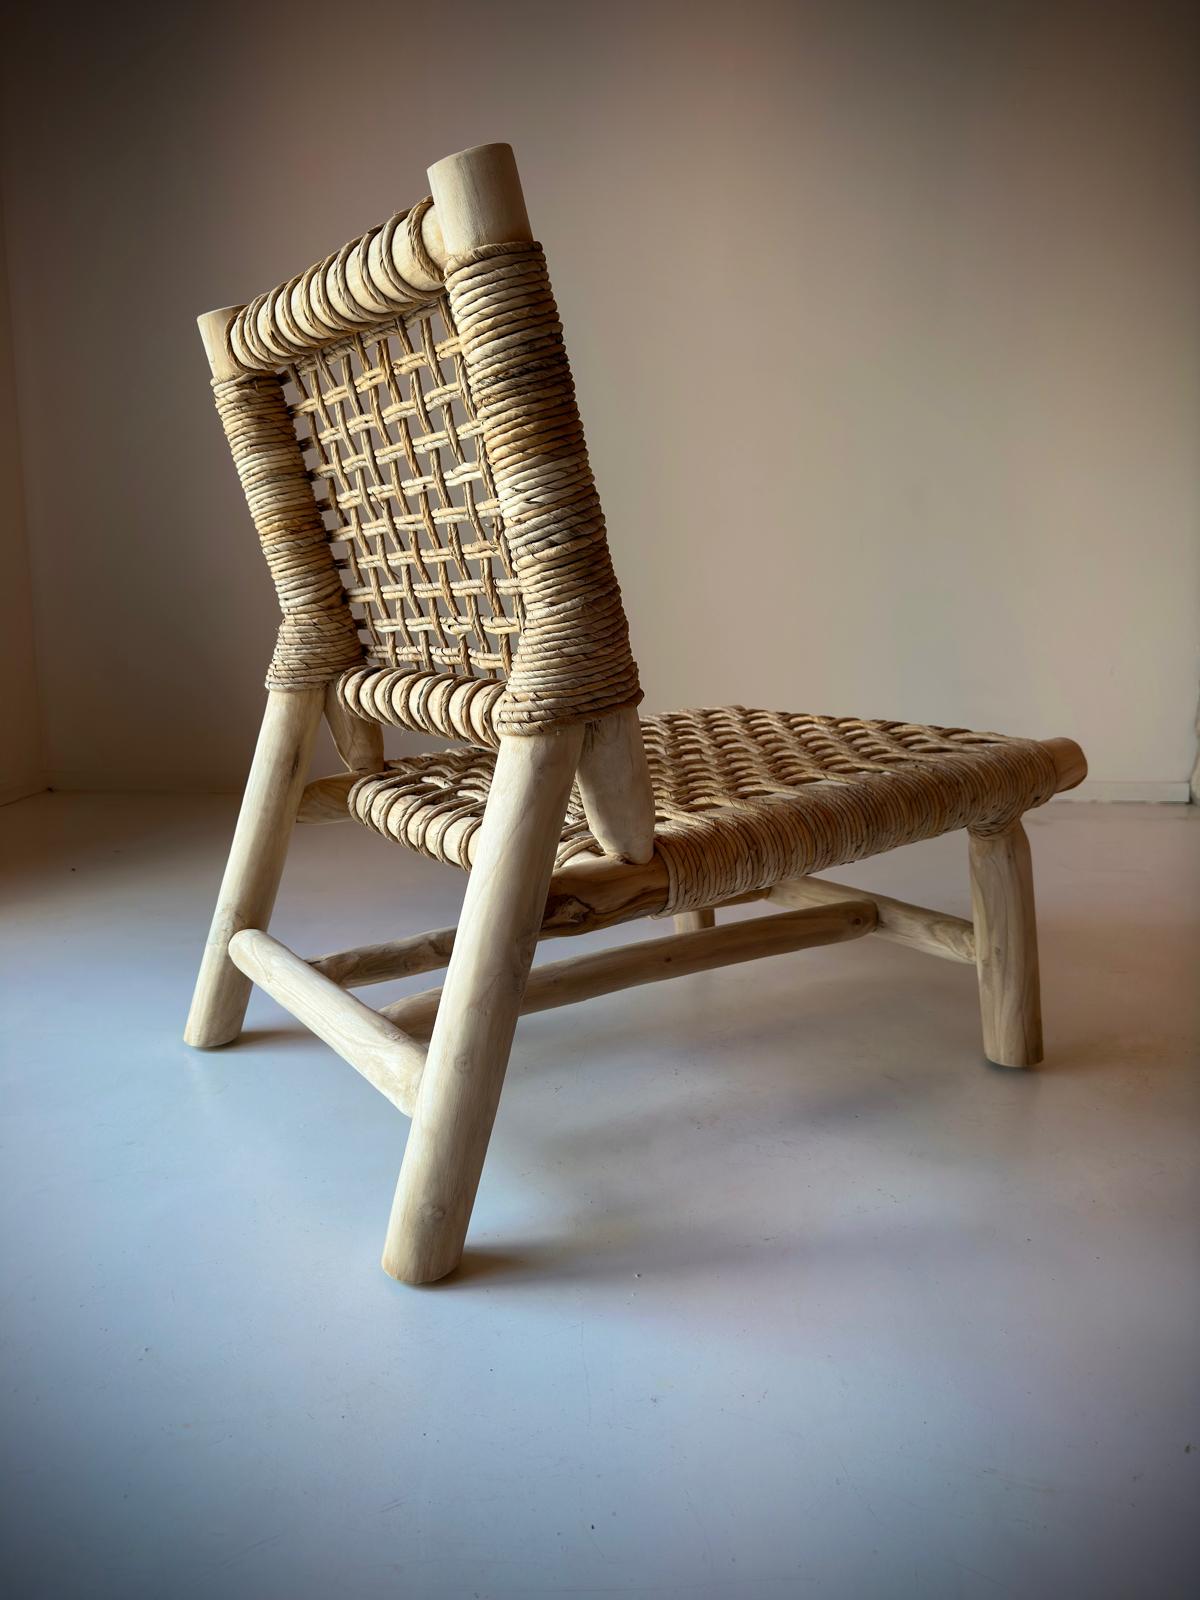 Solawi lounge chair